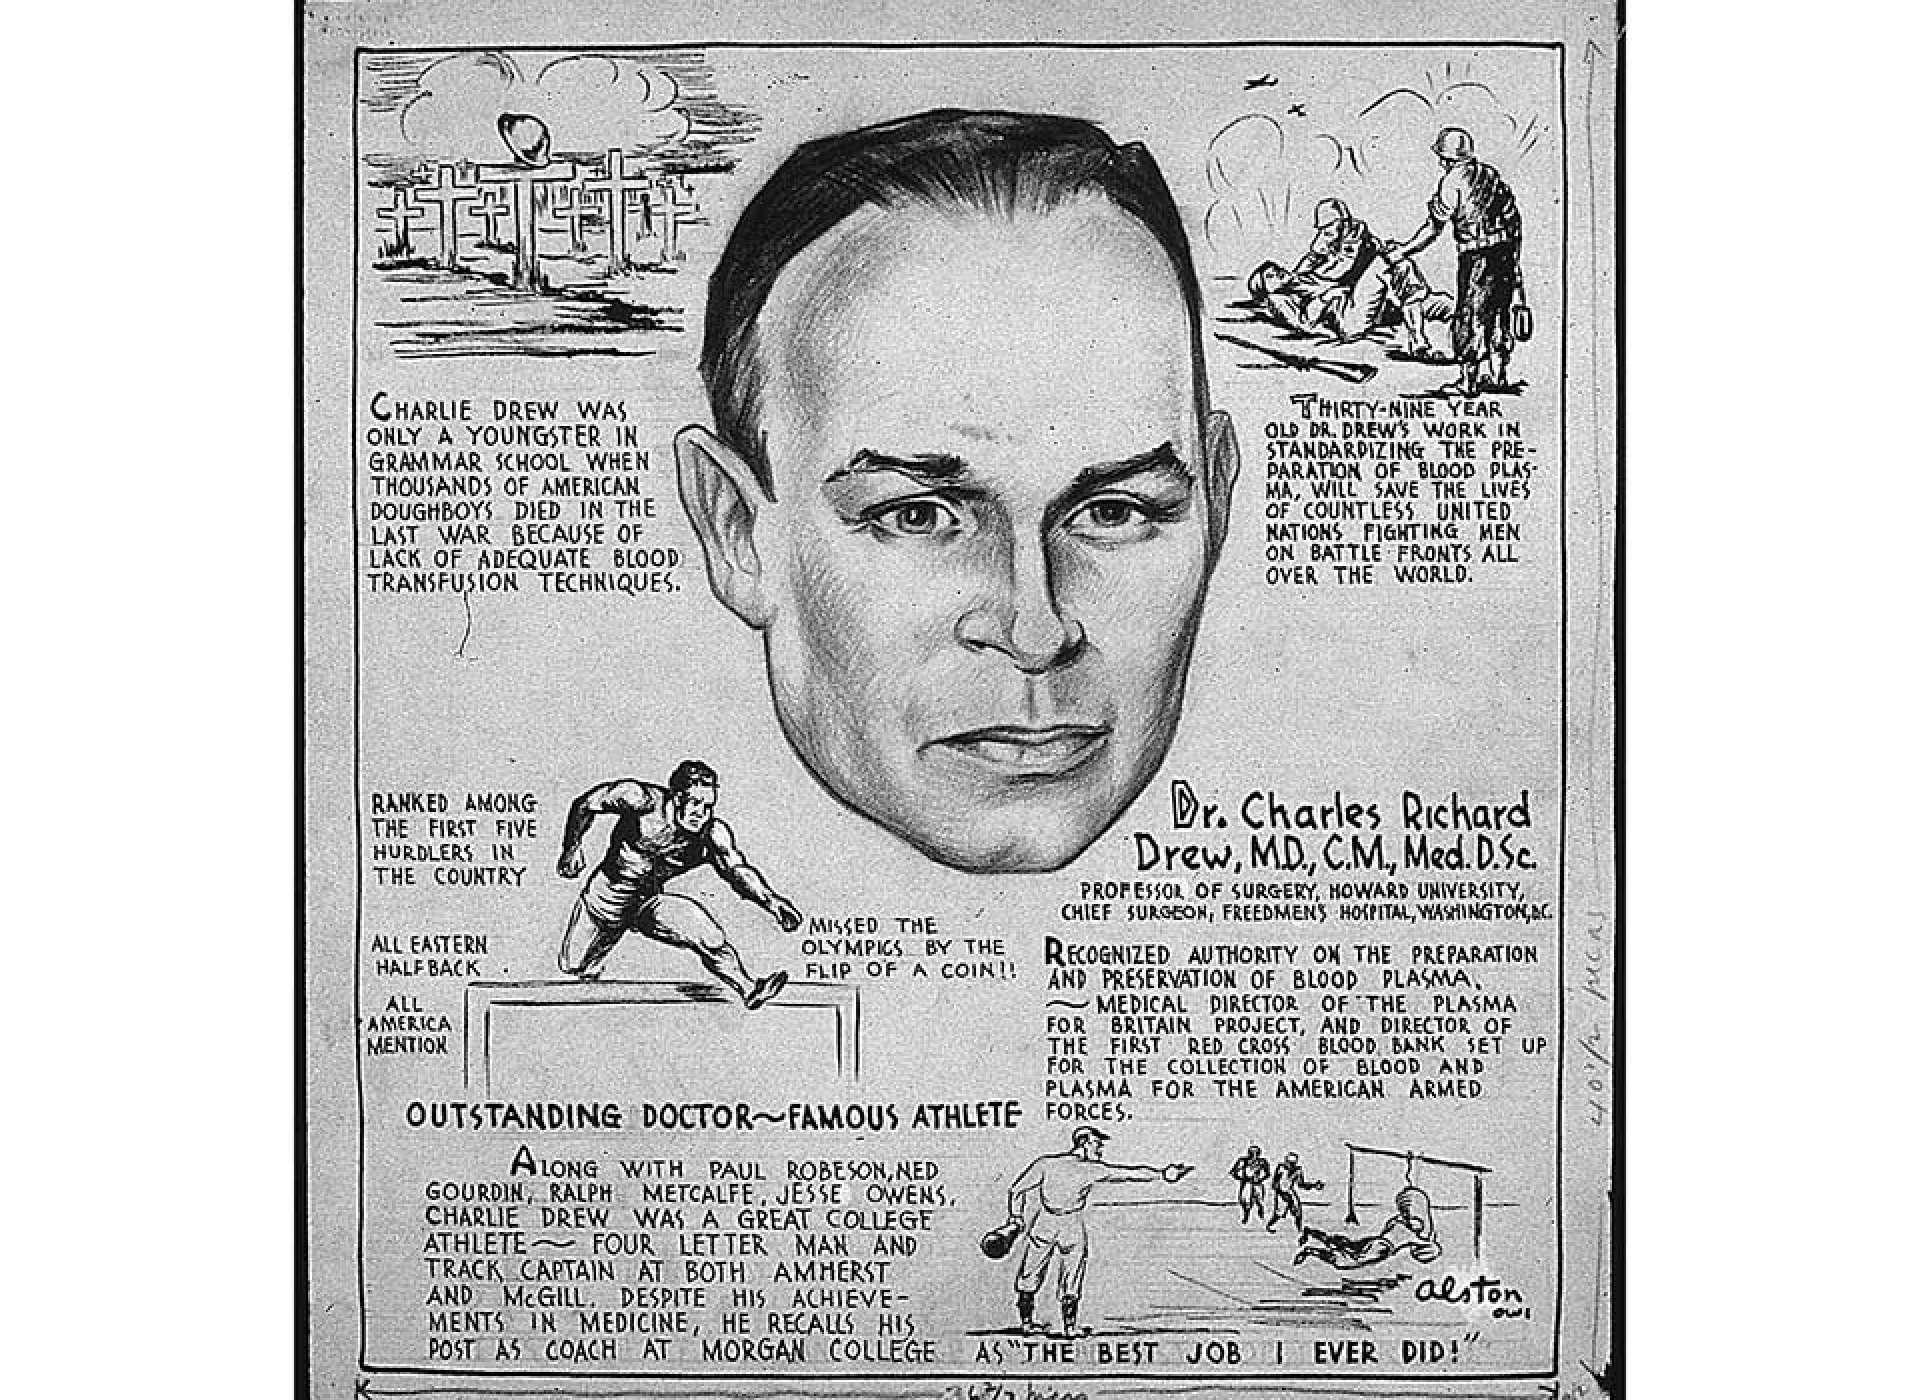 A summary of the life of Charles Drew by artist Charles Alston, 1943; NARA 535693.